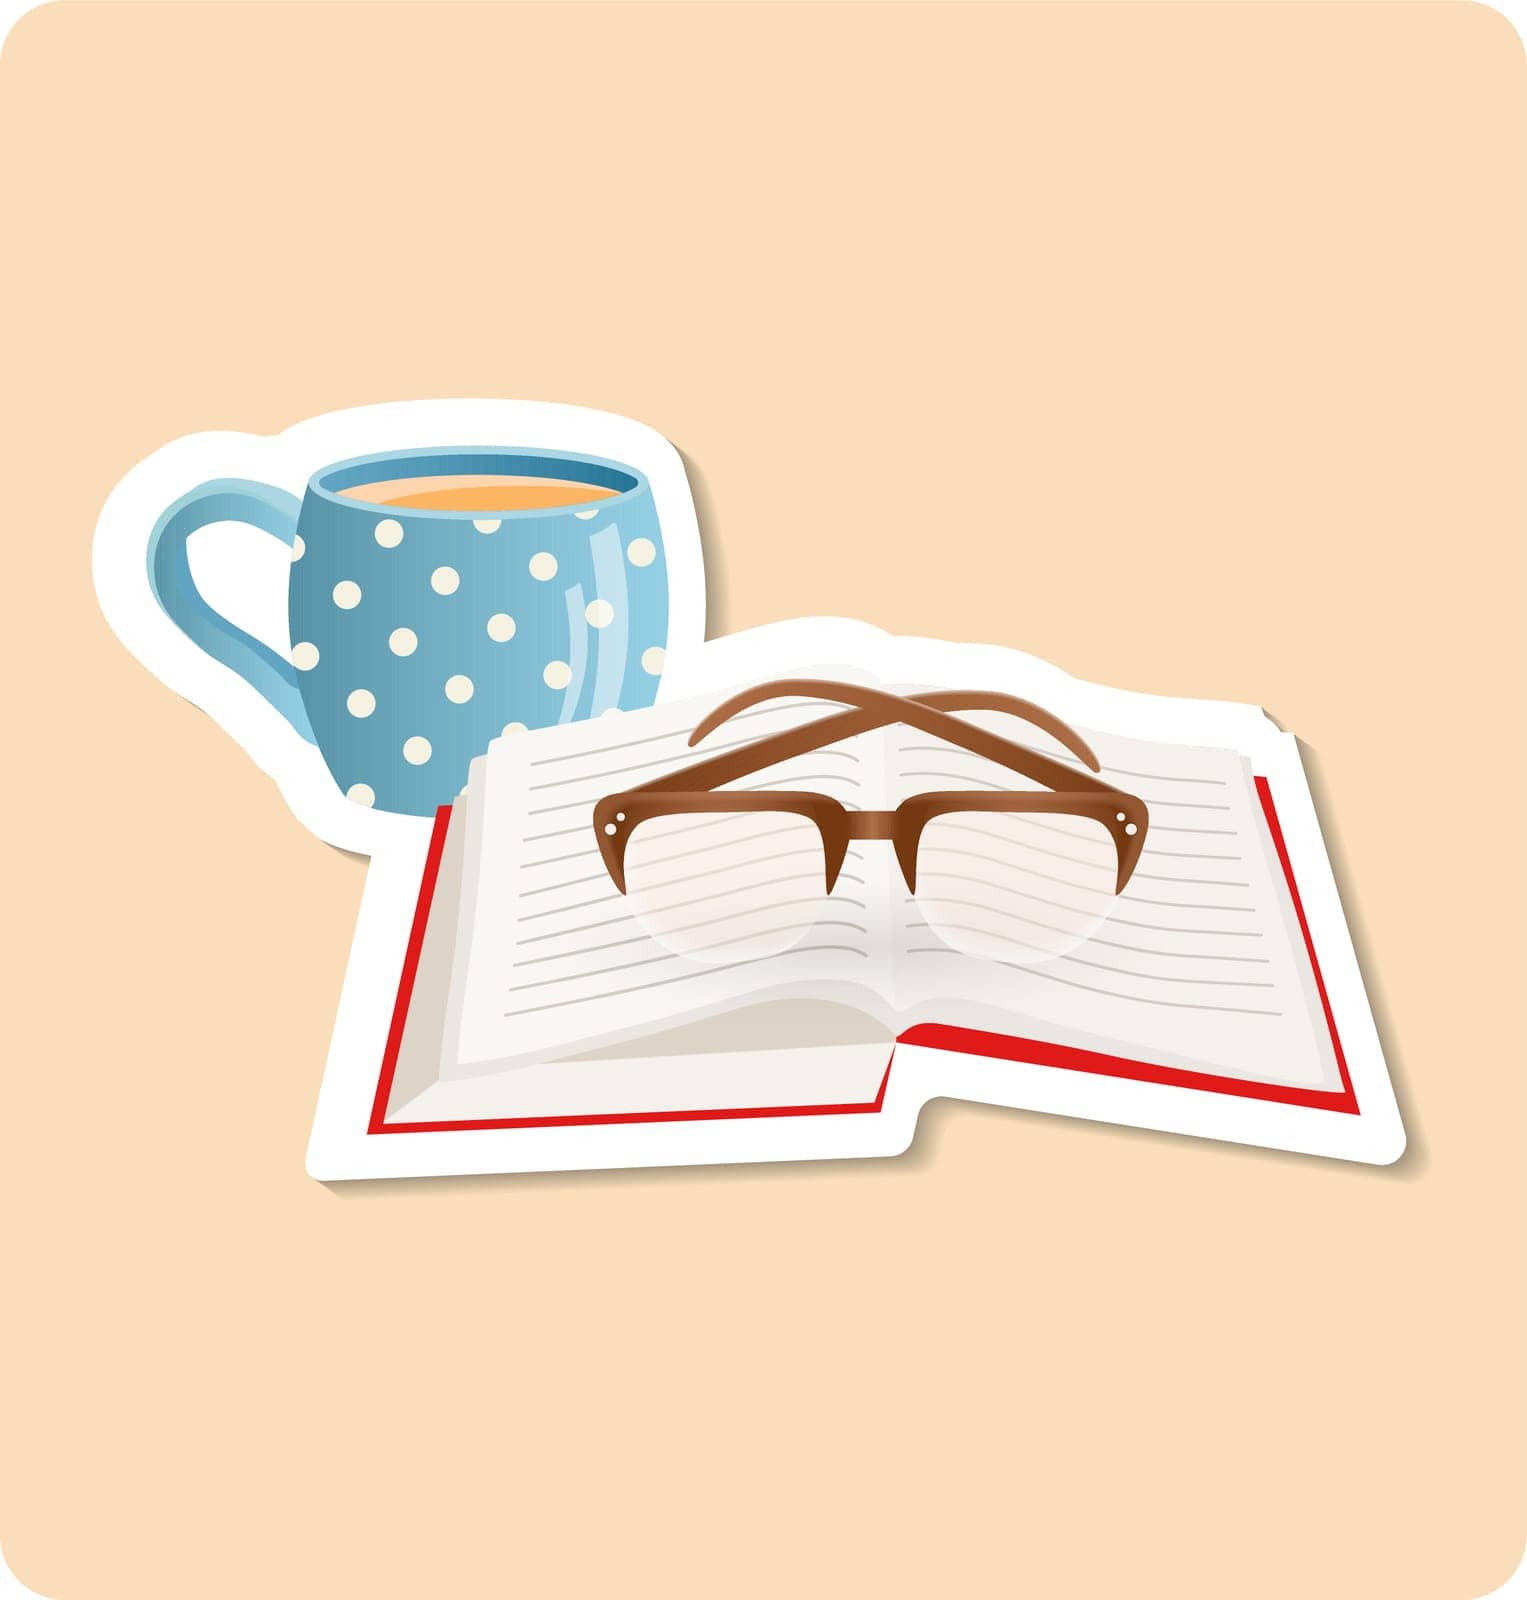 Glasses sticker illustration. Cup, coffee, spectacles, notebook. Editable vector graphic design. by simakovavector